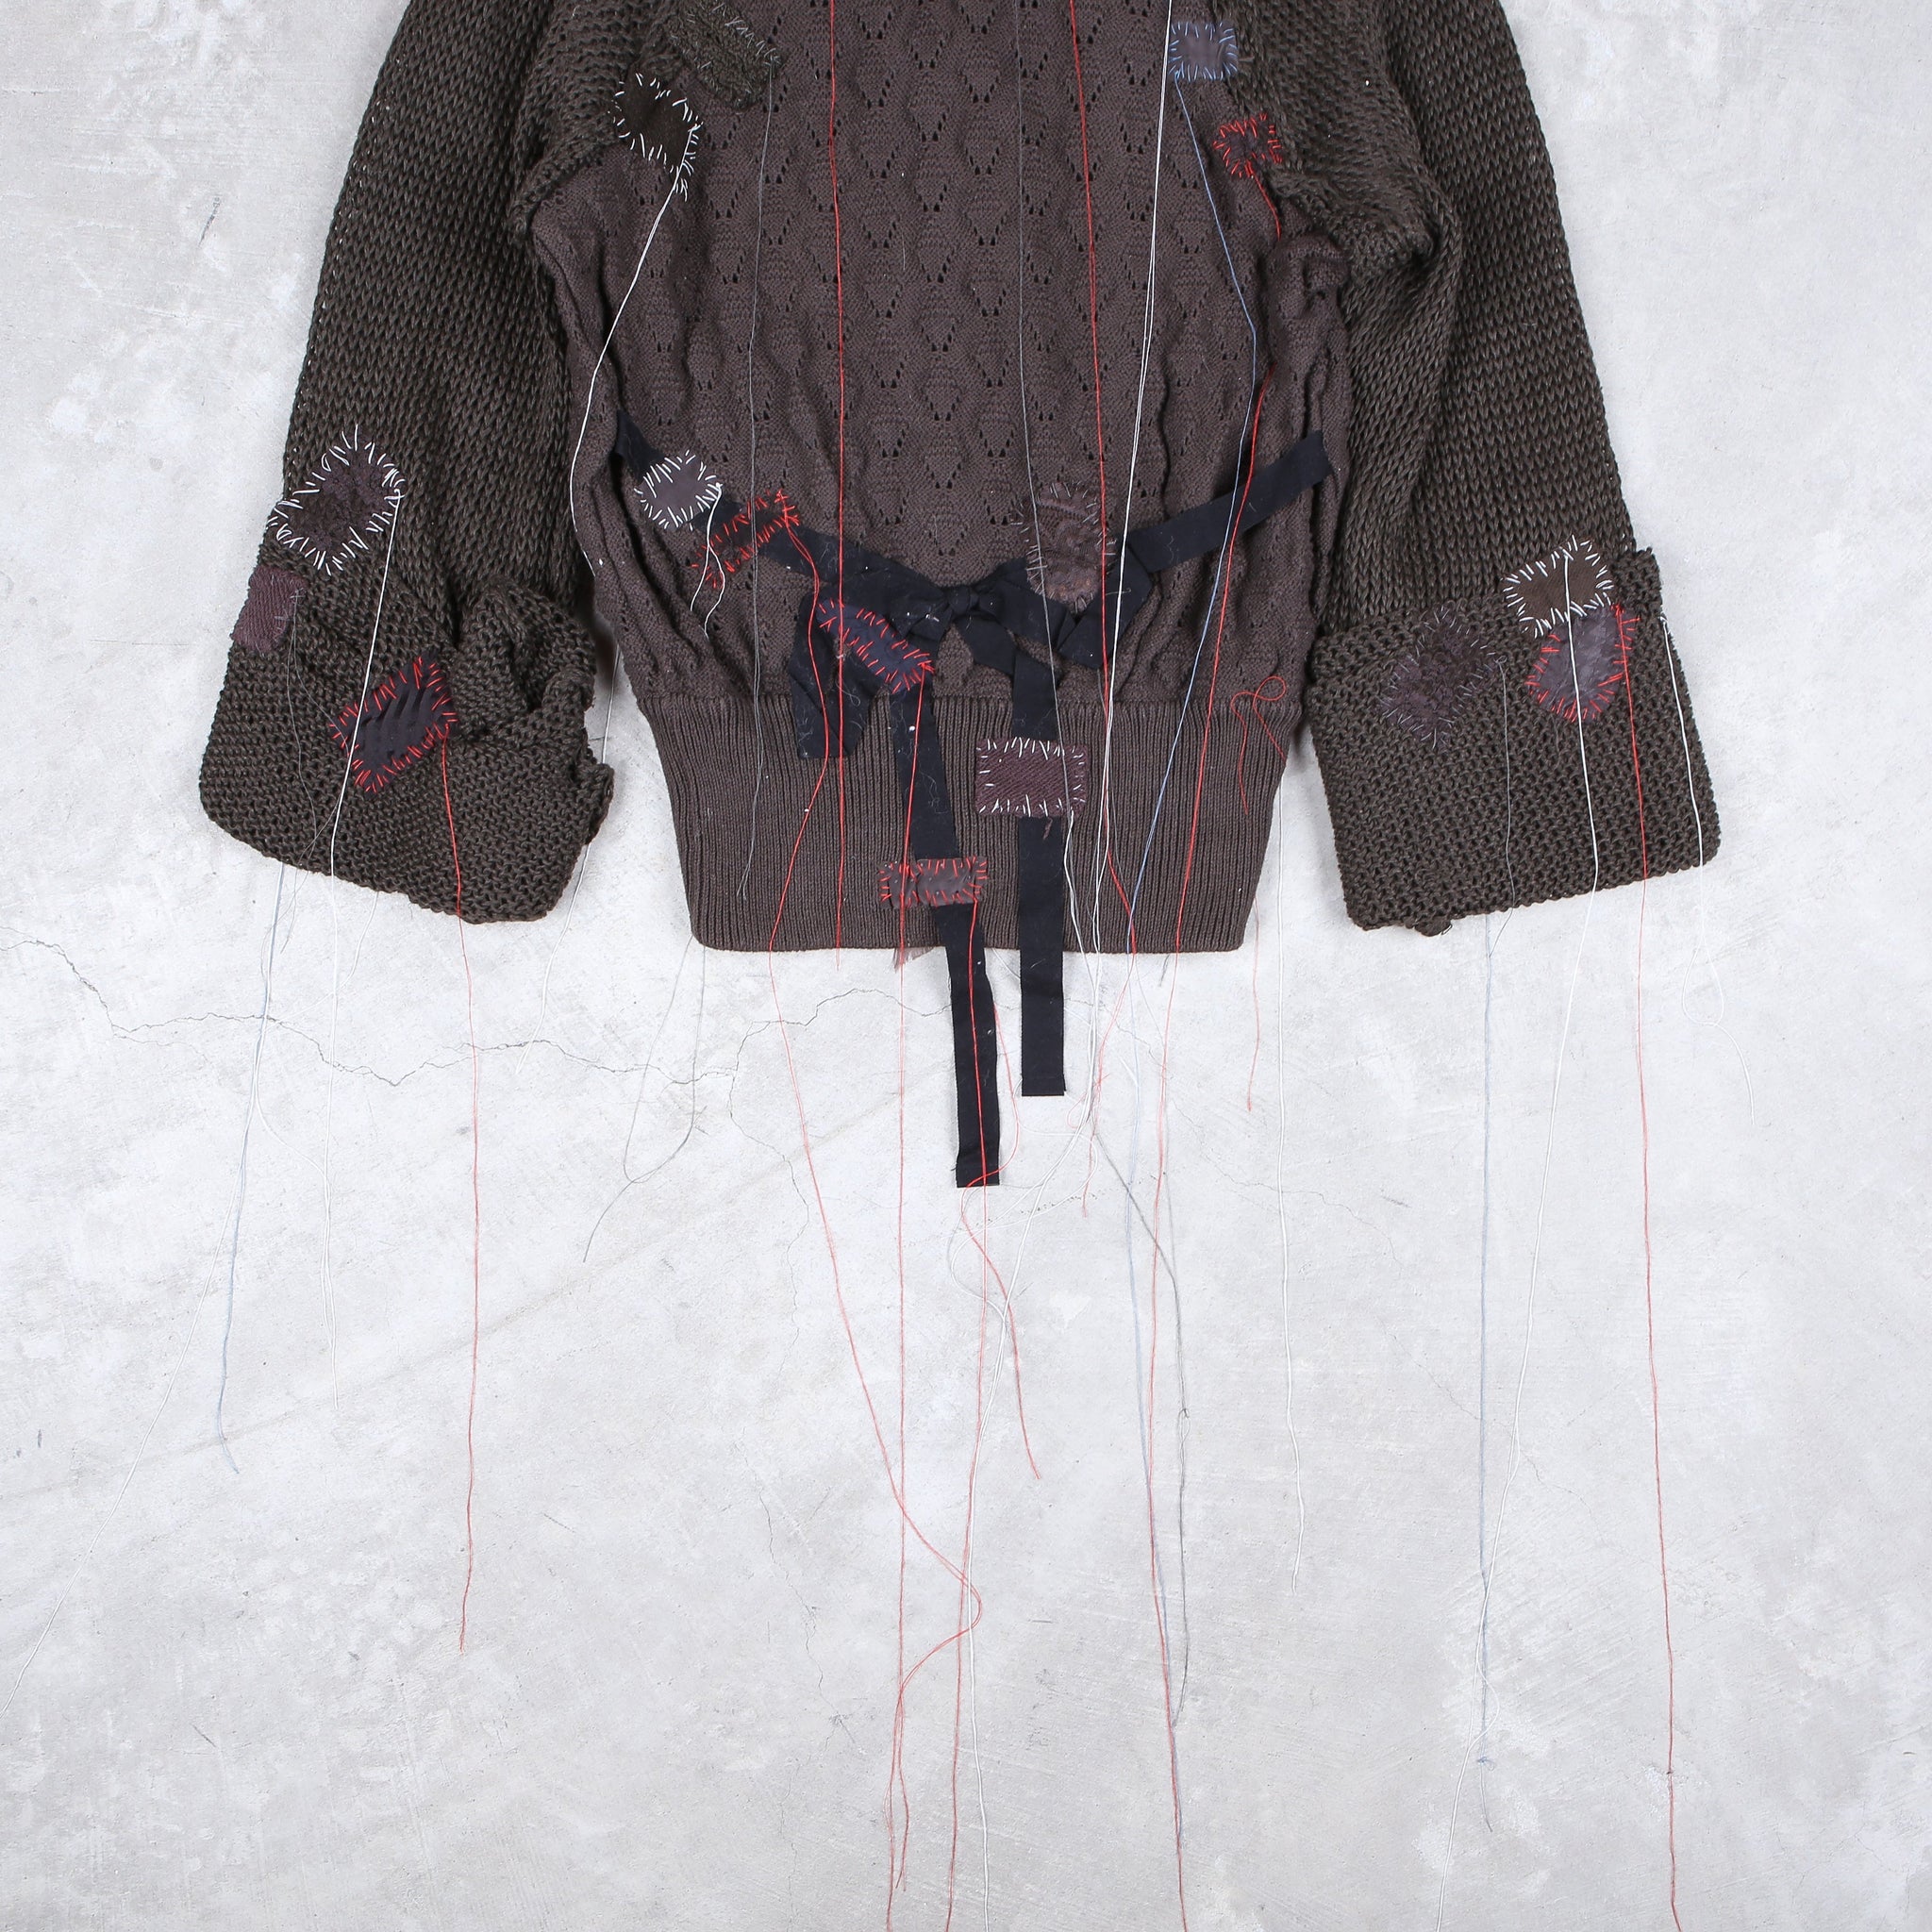 Undercover SS03 "Scab" Cardigan